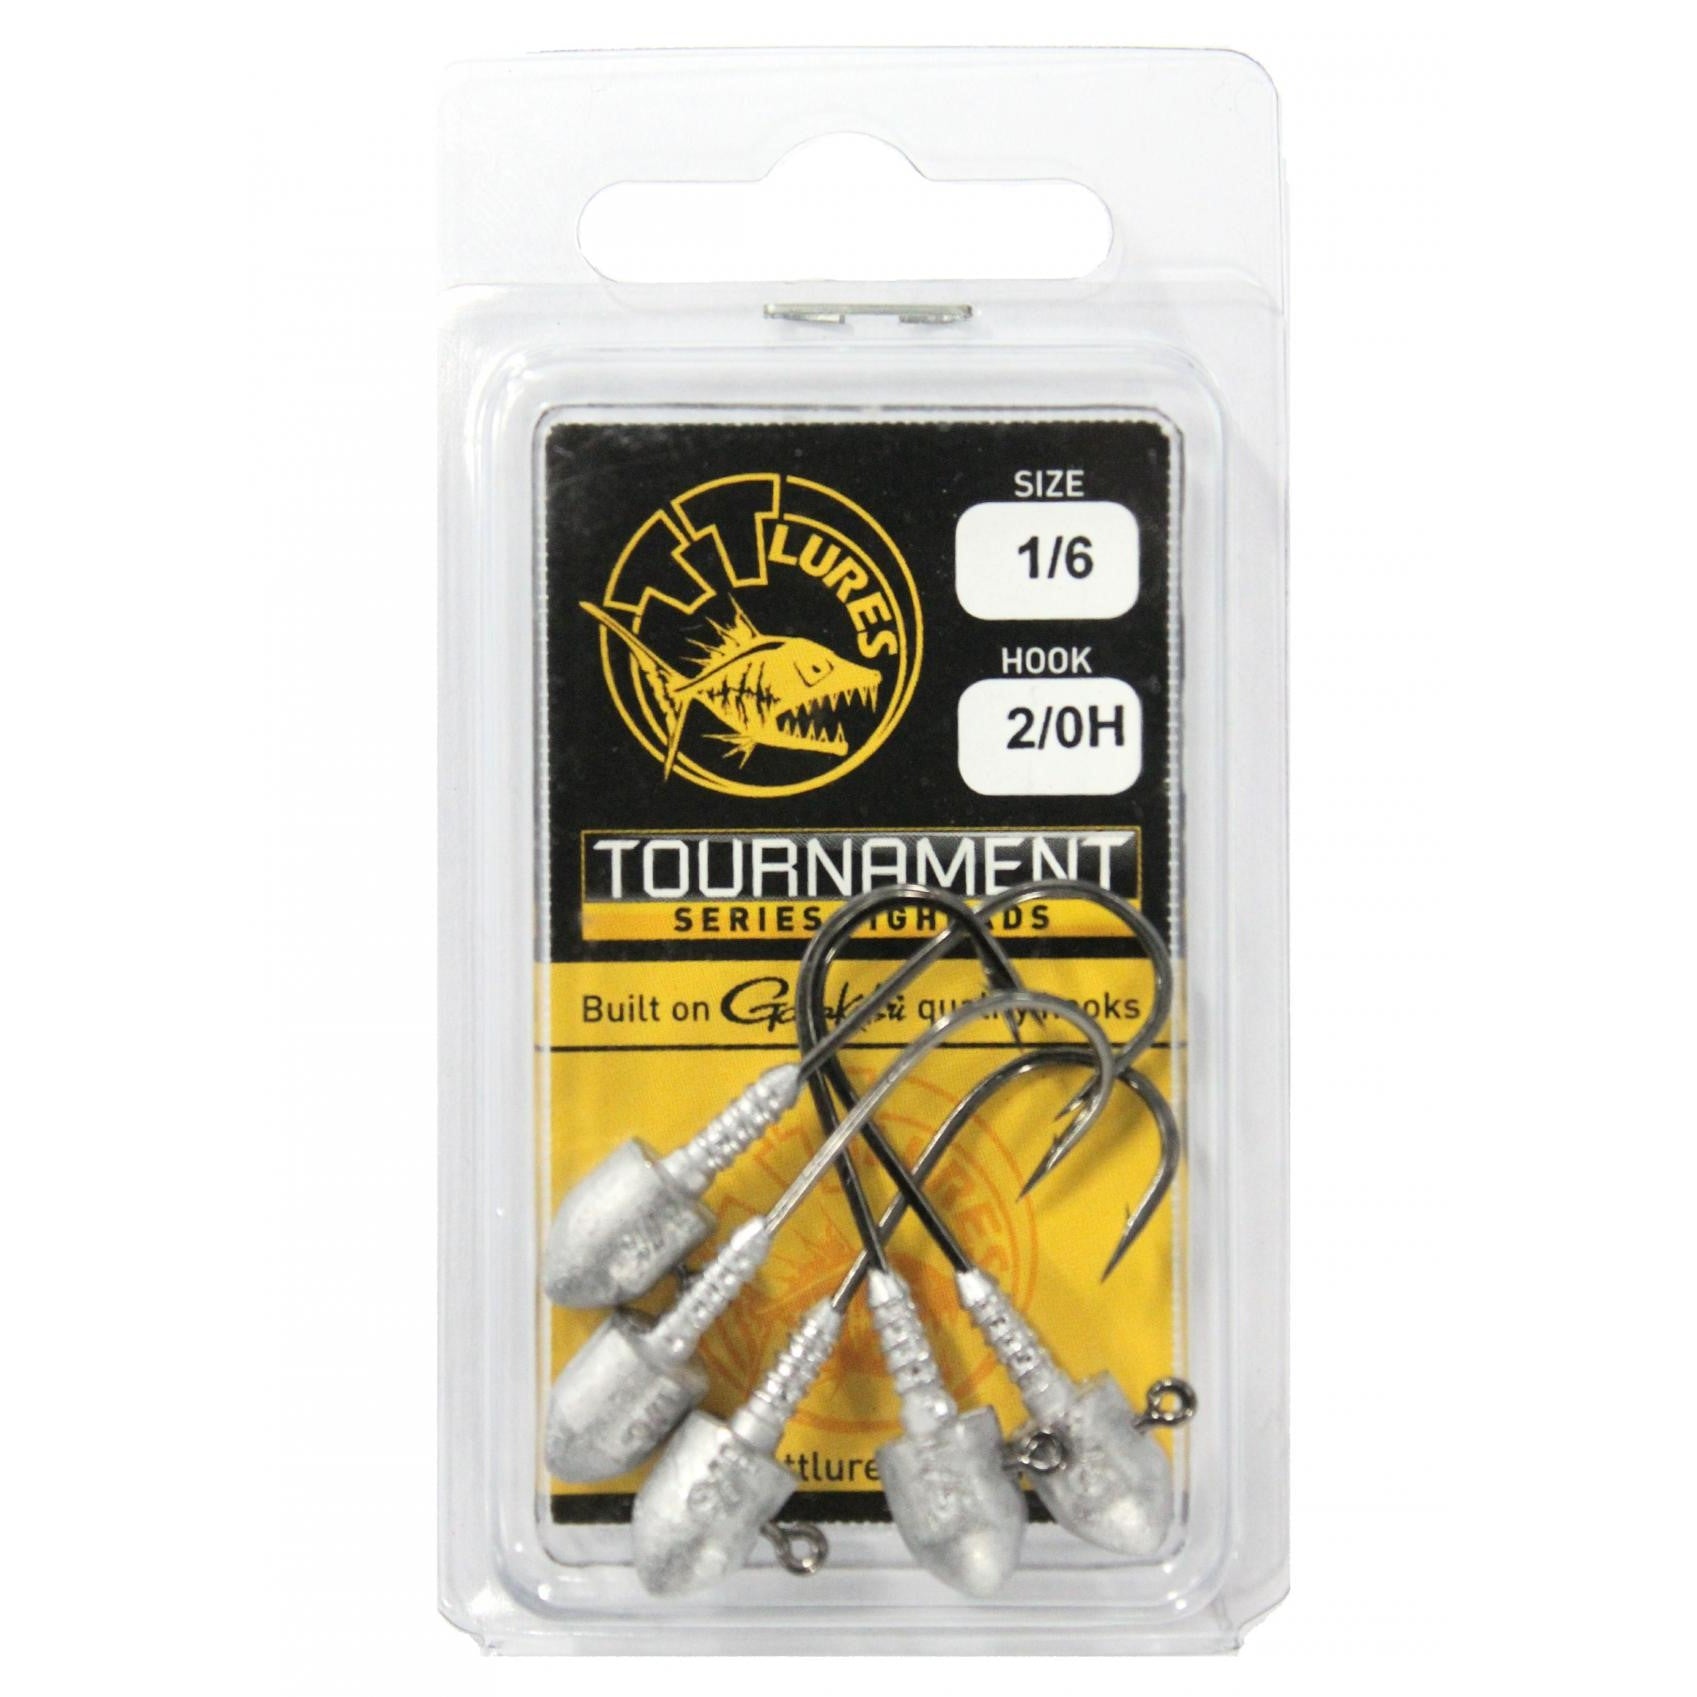 TT Tournament Jigheads - Compleat Angler Nedlands Pro Tackle